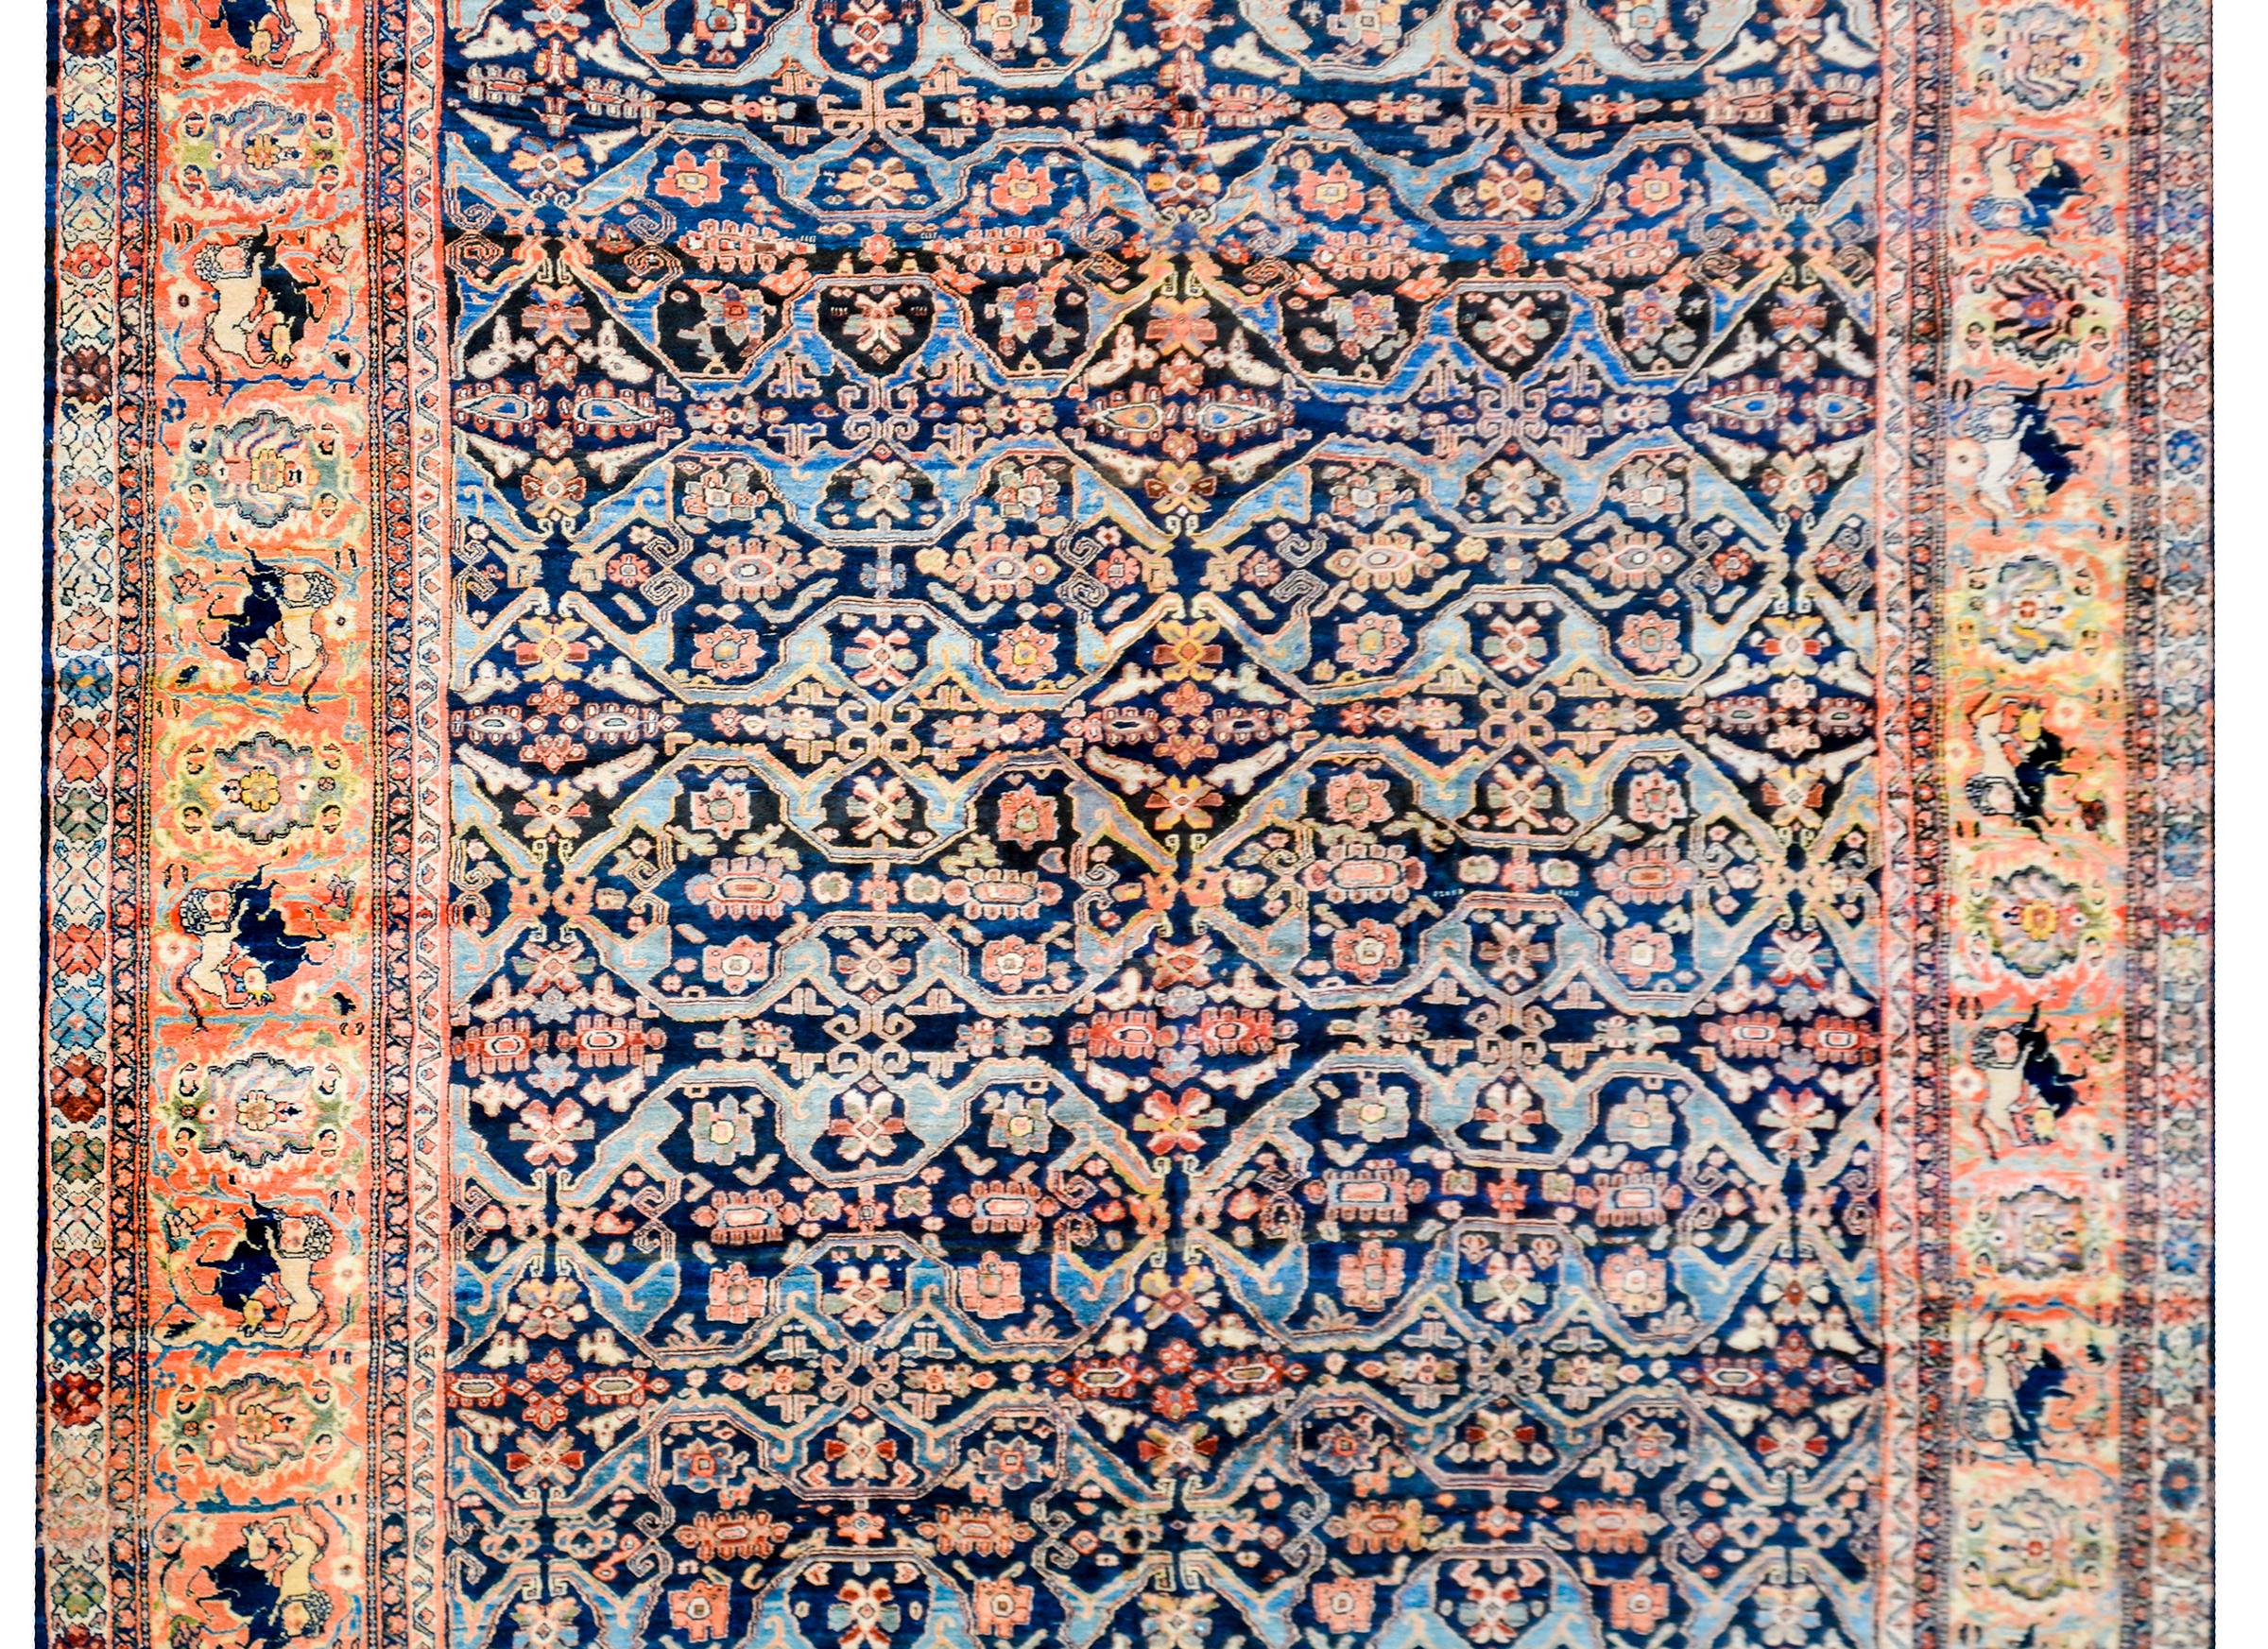 An unbelievable early 20th century Persian Sultanabad rug with a fantastic tribal pattern with a densely woven field of stylized flowers with a lacy trellis pattern woven with an abrash indigo color. The border is fantastic with a wide stripe